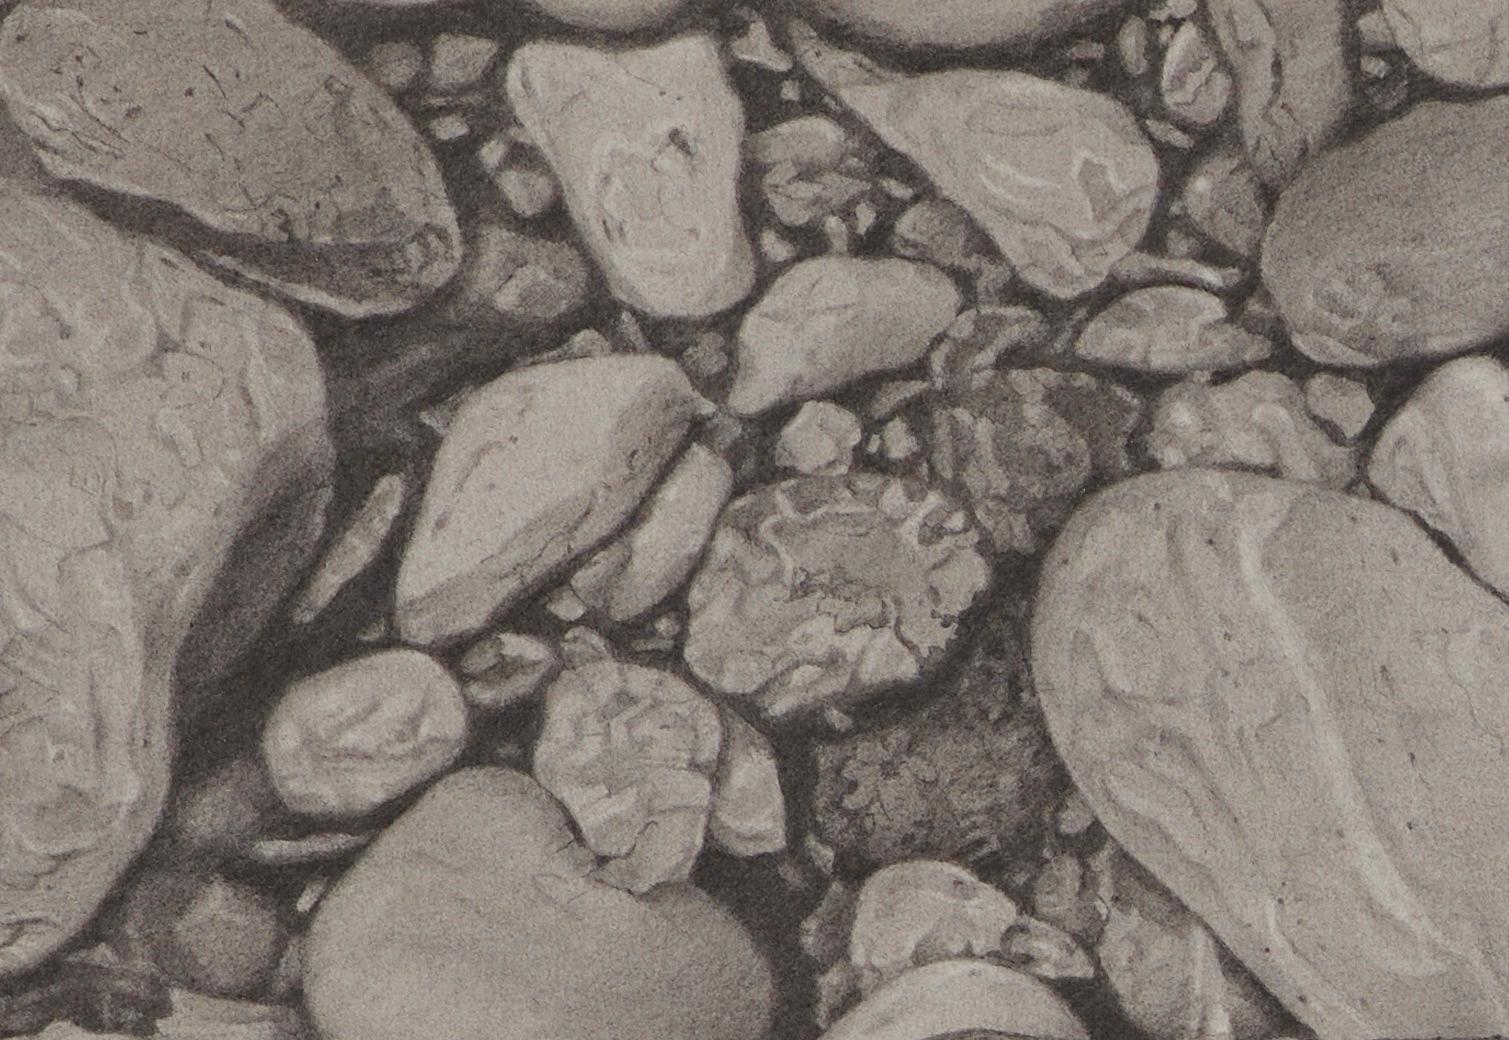 Riverbank 2, photorealist graphite nature drawing, 2018 - Art by Mary Reilly